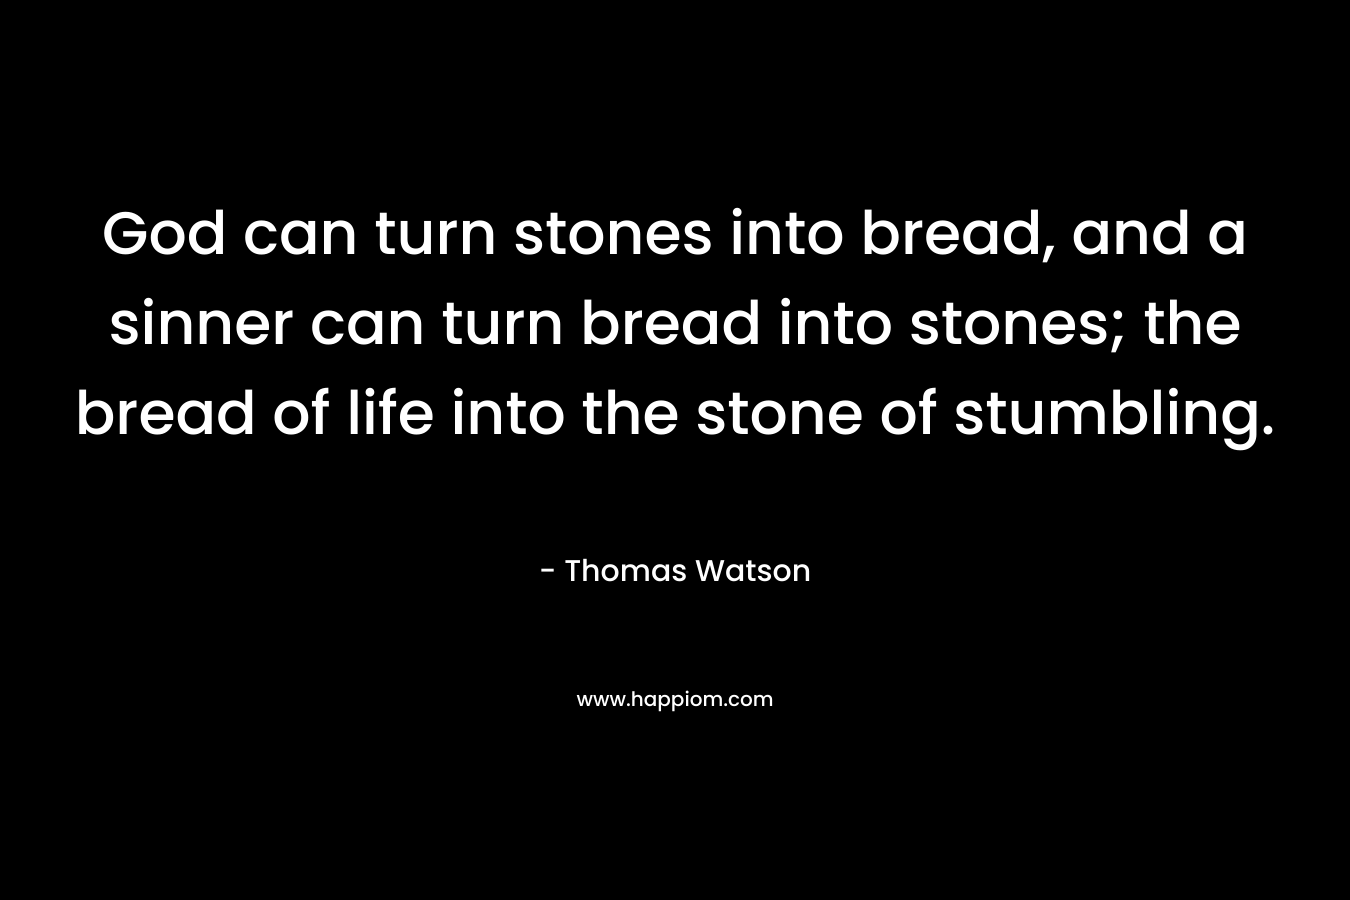 God can turn stones into bread, and a sinner can turn bread into stones; the bread of life into the stone of stumbling.